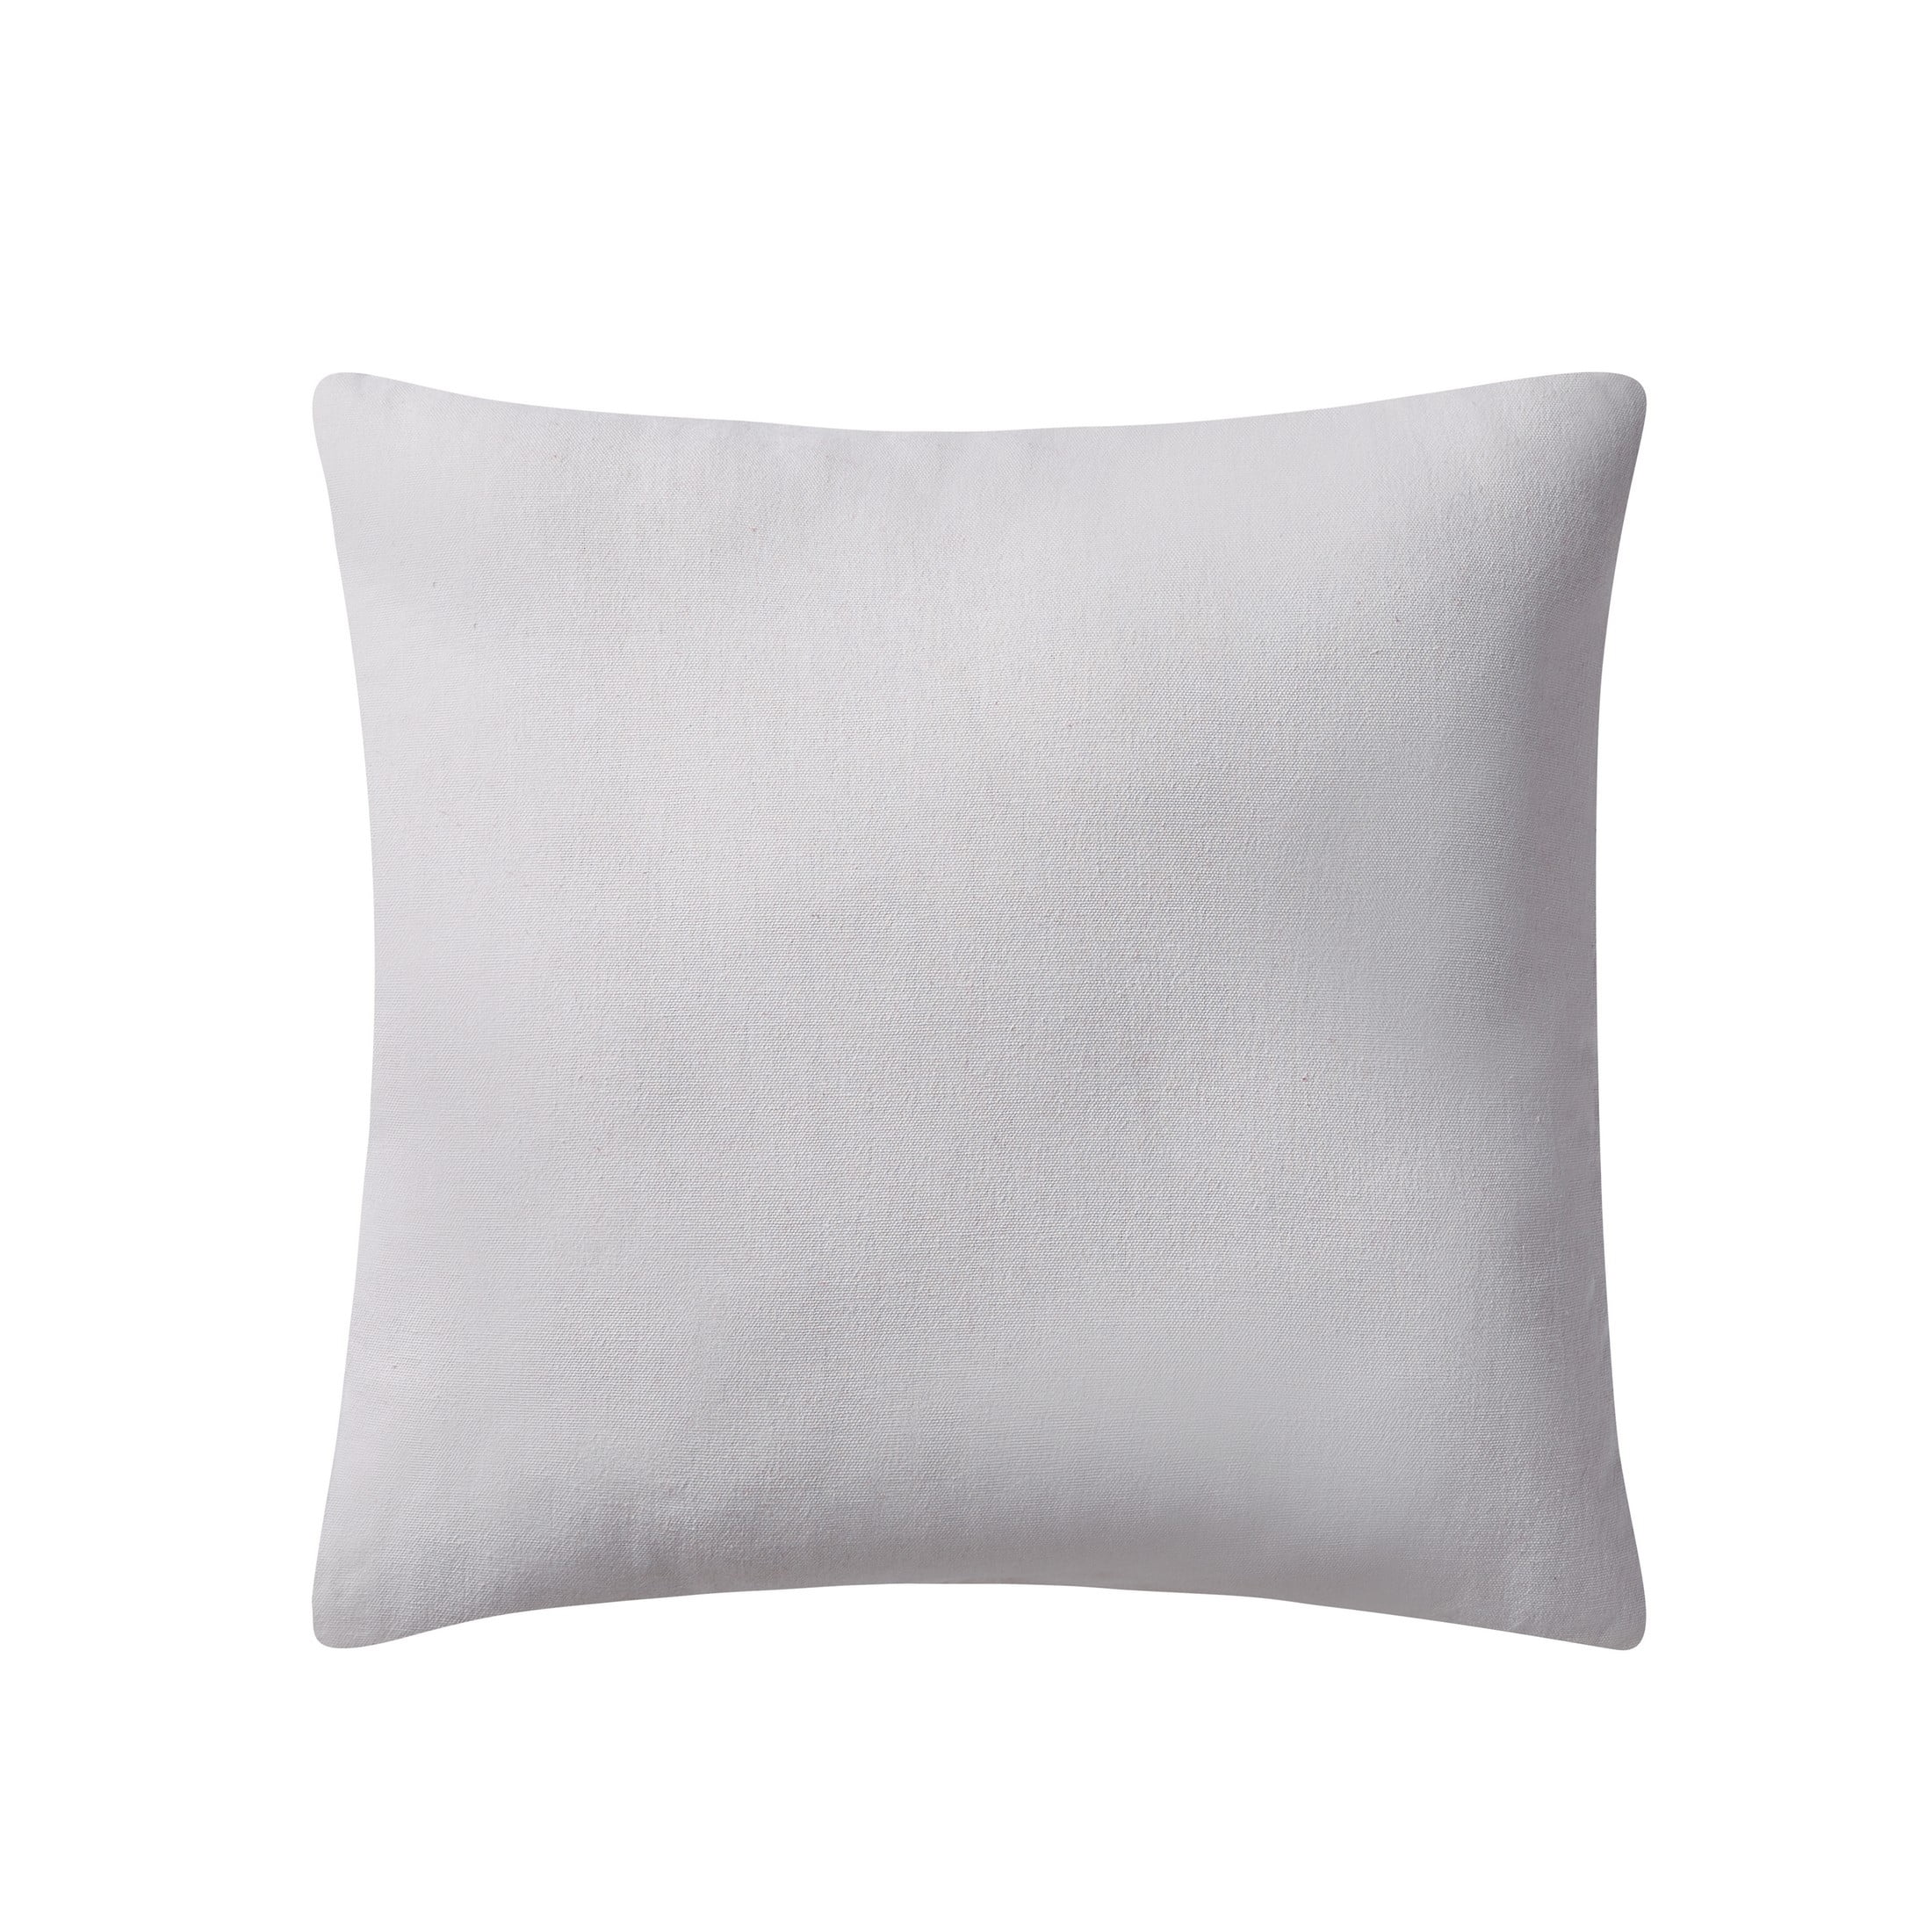 18x18 Square Dublin Throw Pillow Ivory - Vcny : Target